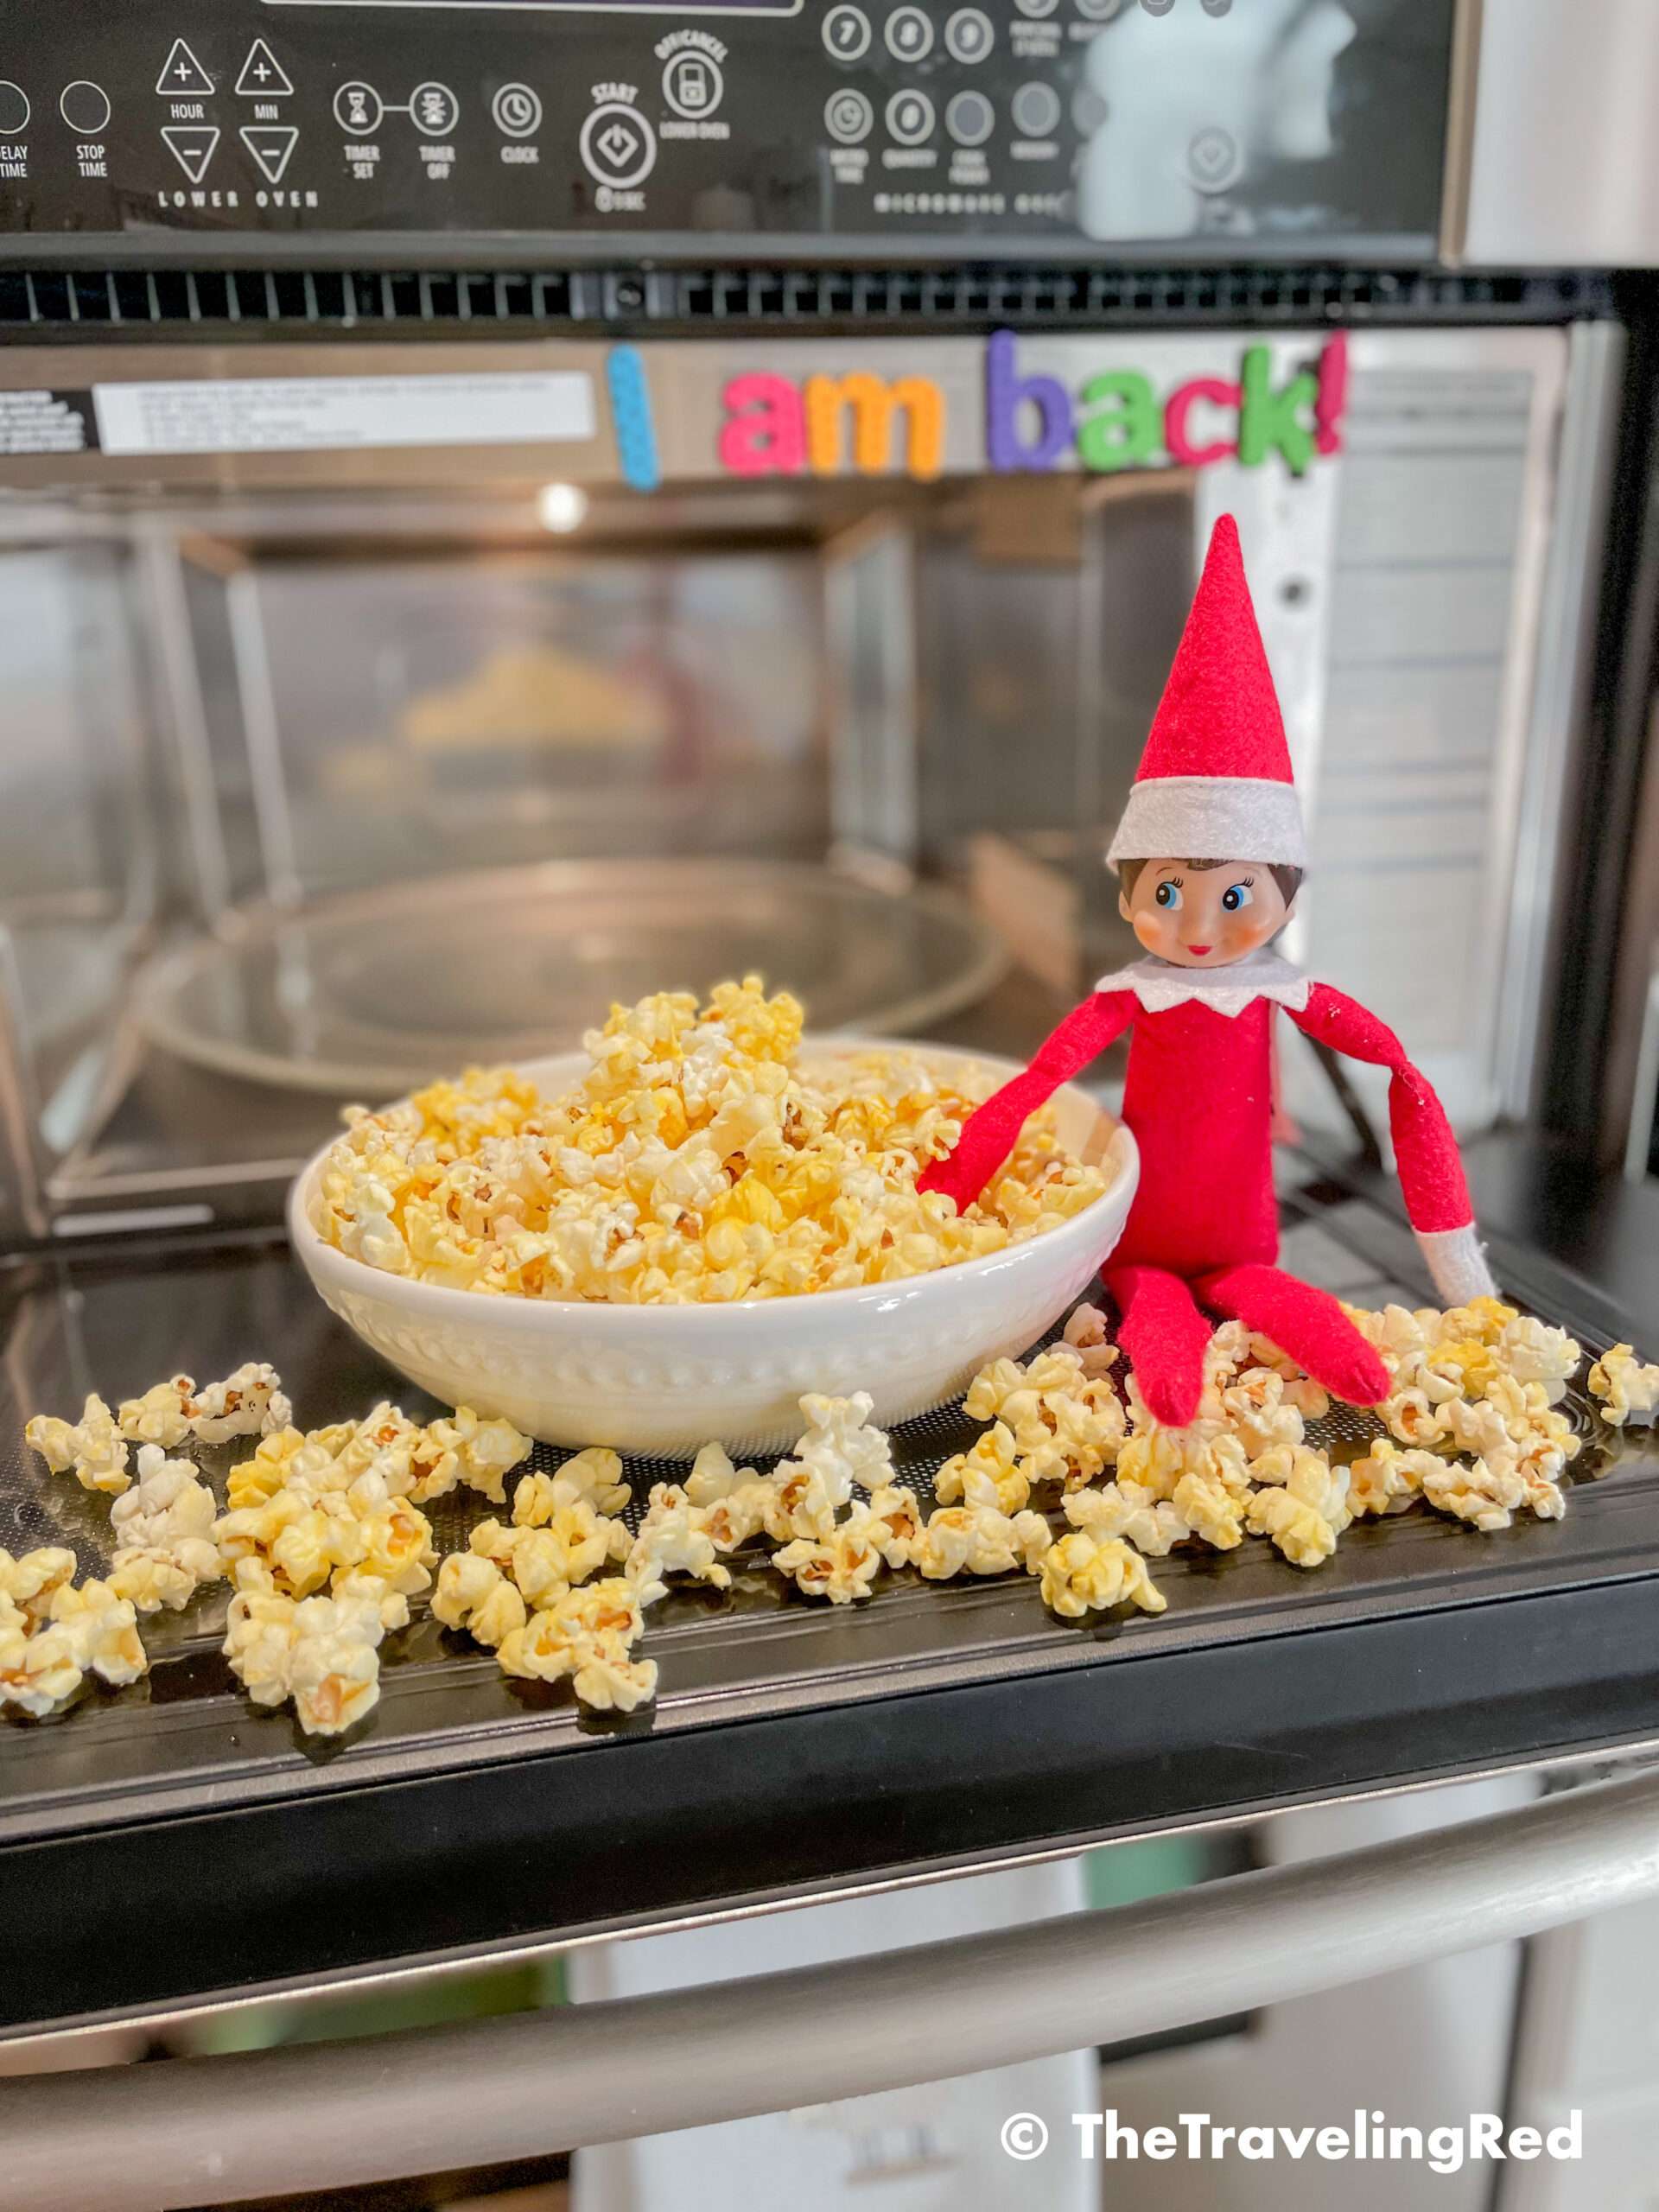 Naughty Elf on the shelf made popcorn and made a huge mess in our kitchen. We had popcorn on the floor and all over the microwave. She also used our magnet letters to leave a message. Fun and easy elf on the shelf ideas for a naughty elf that are quick and easy using things you have at home.